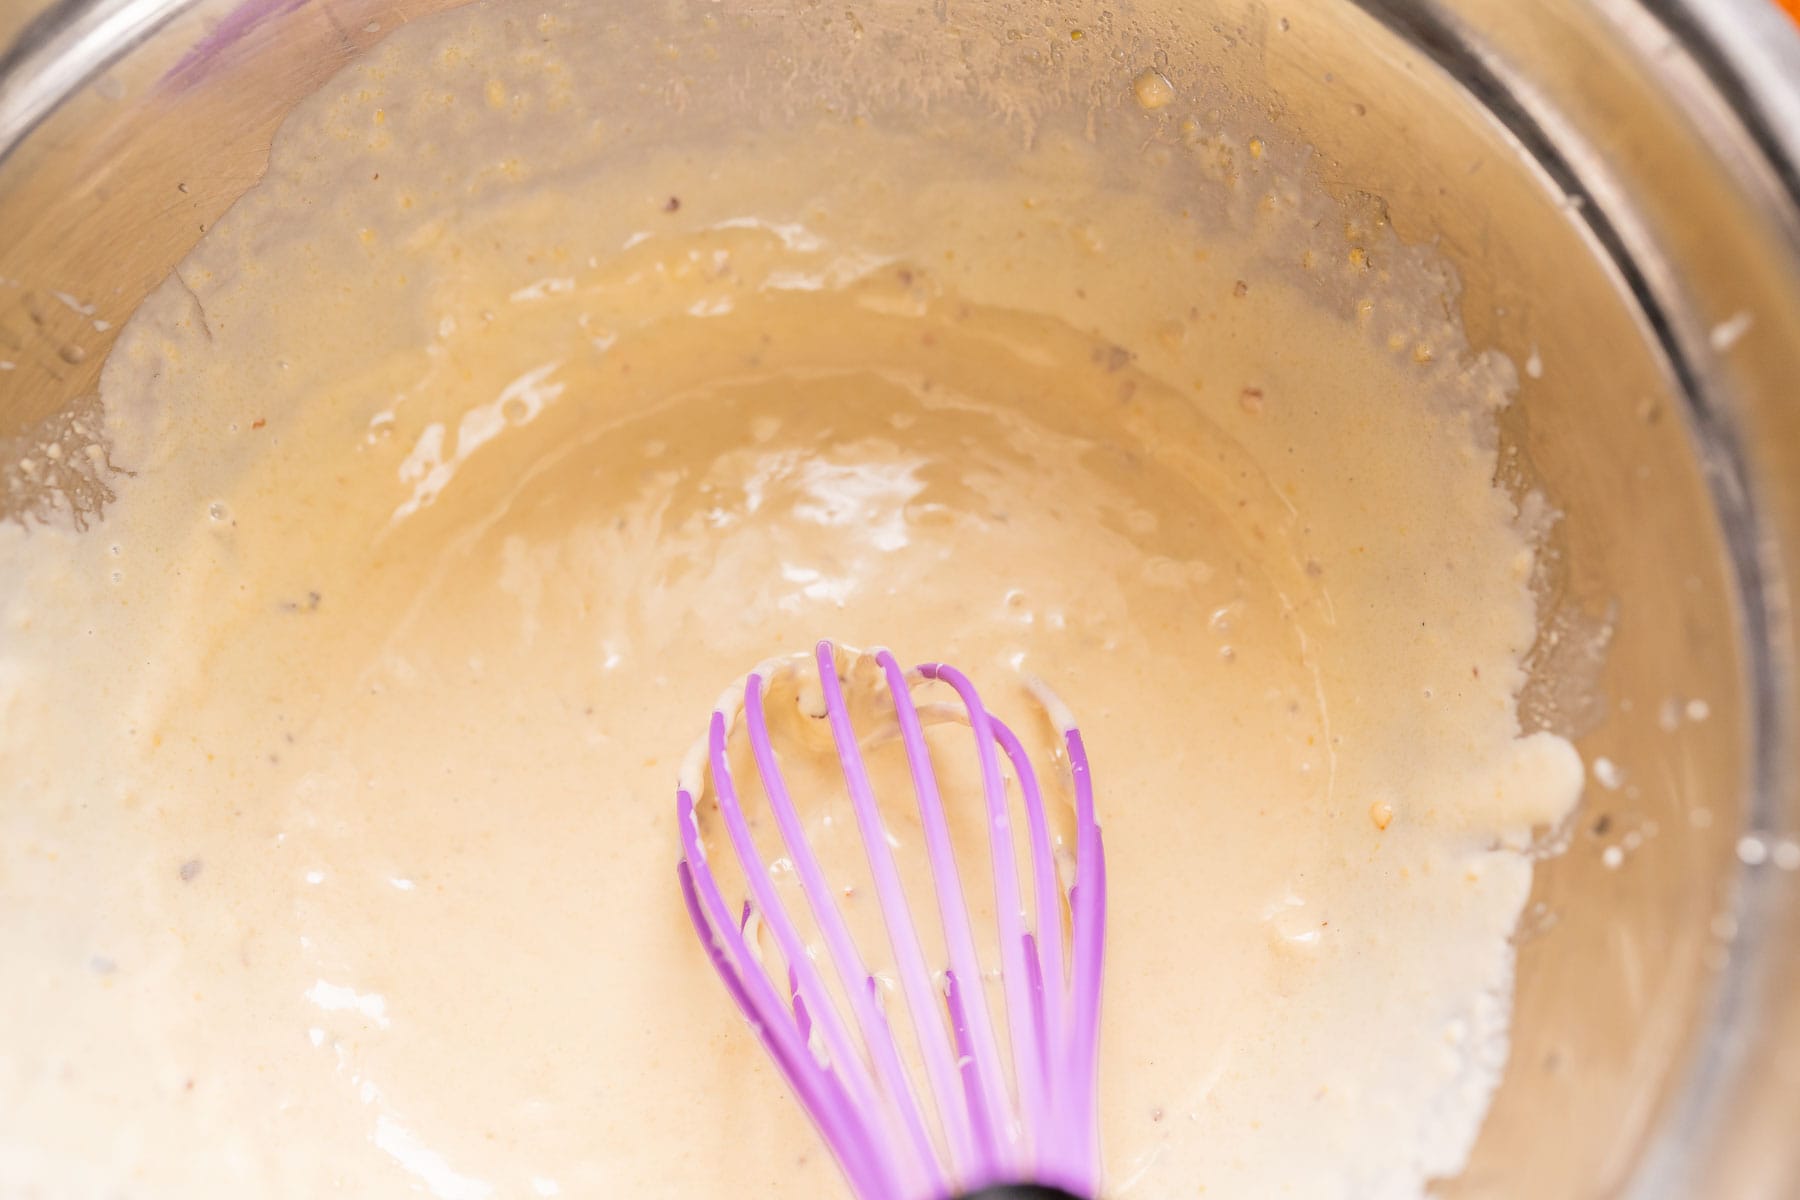 A large silver mixing bowl filled with homemade salad dressing and a purple whisk.